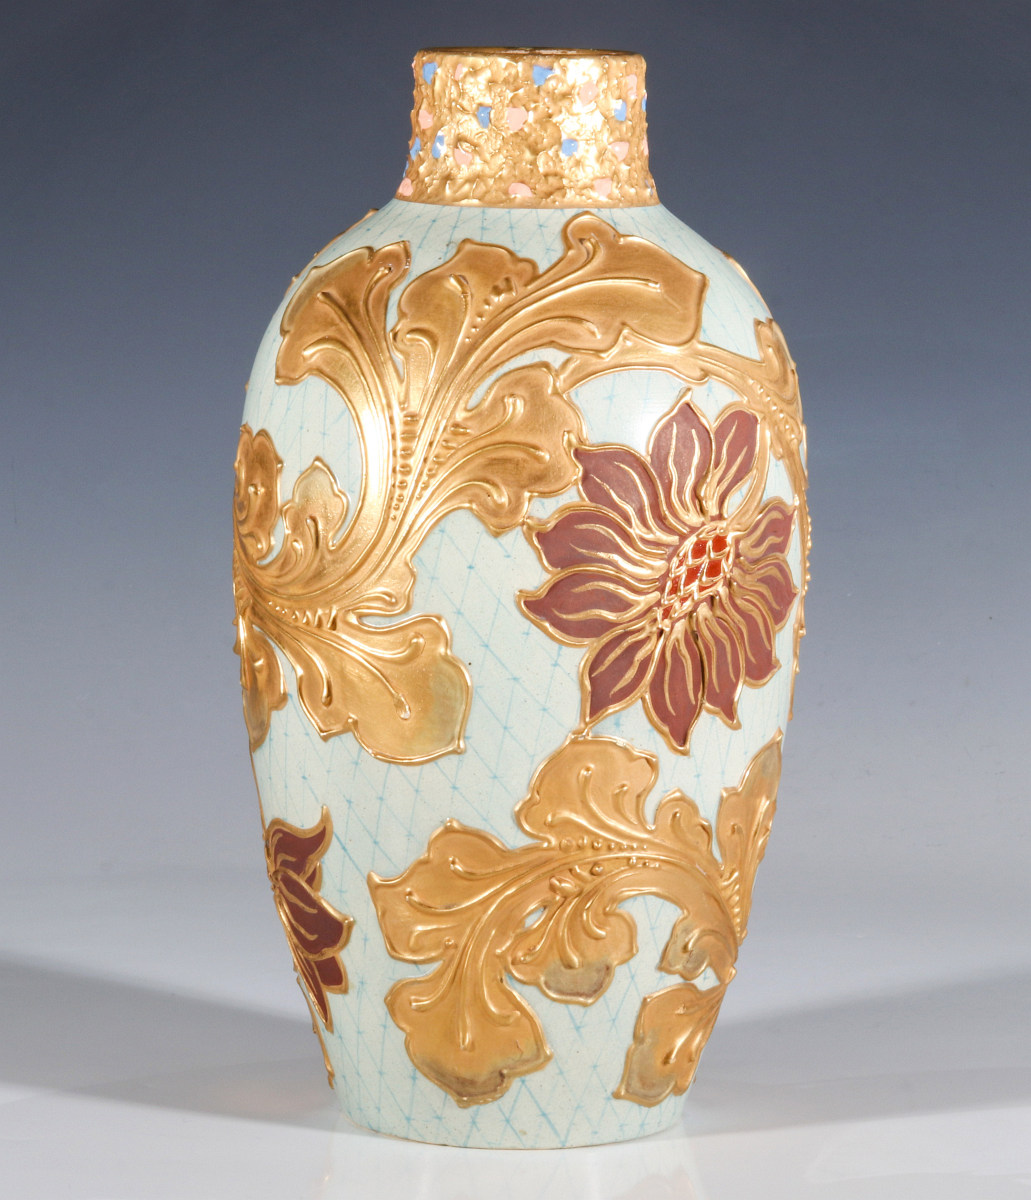 A 19C WEDGWOOD VASE WITH HEAVY GOLD APPLICATION